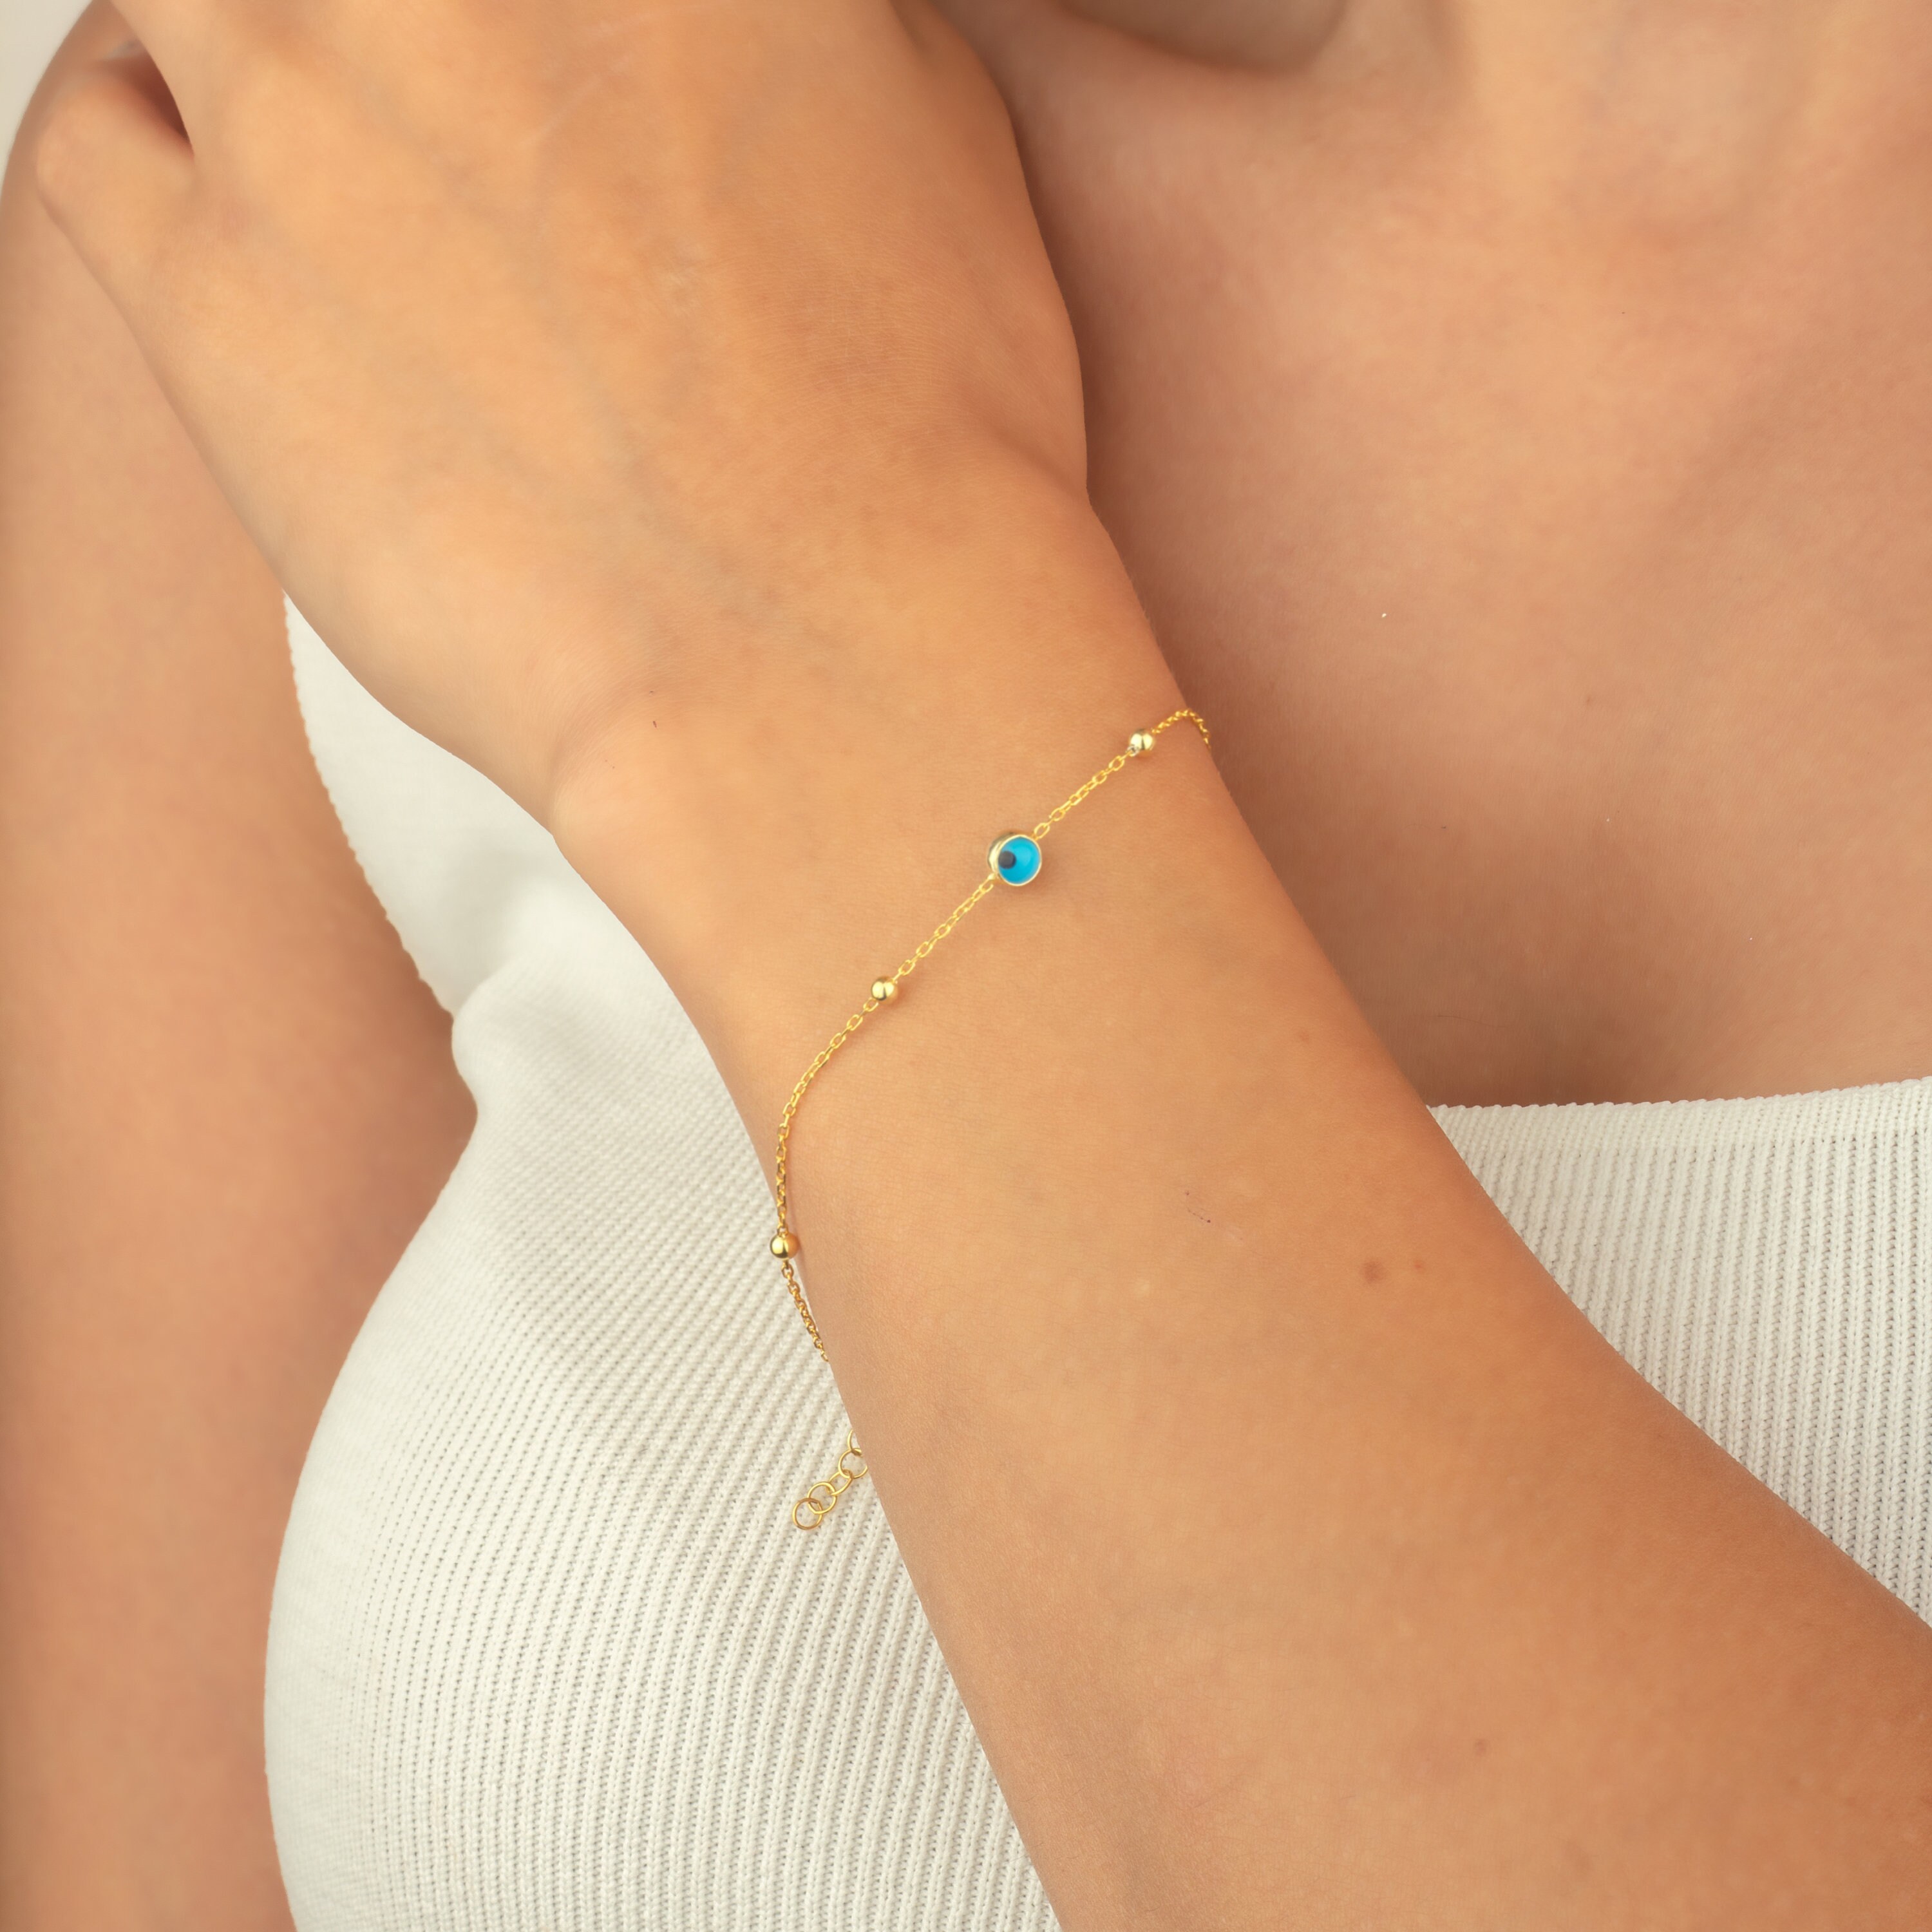 Elsa Peretti® Color by the Yard Turquoise Bracelet in Silver